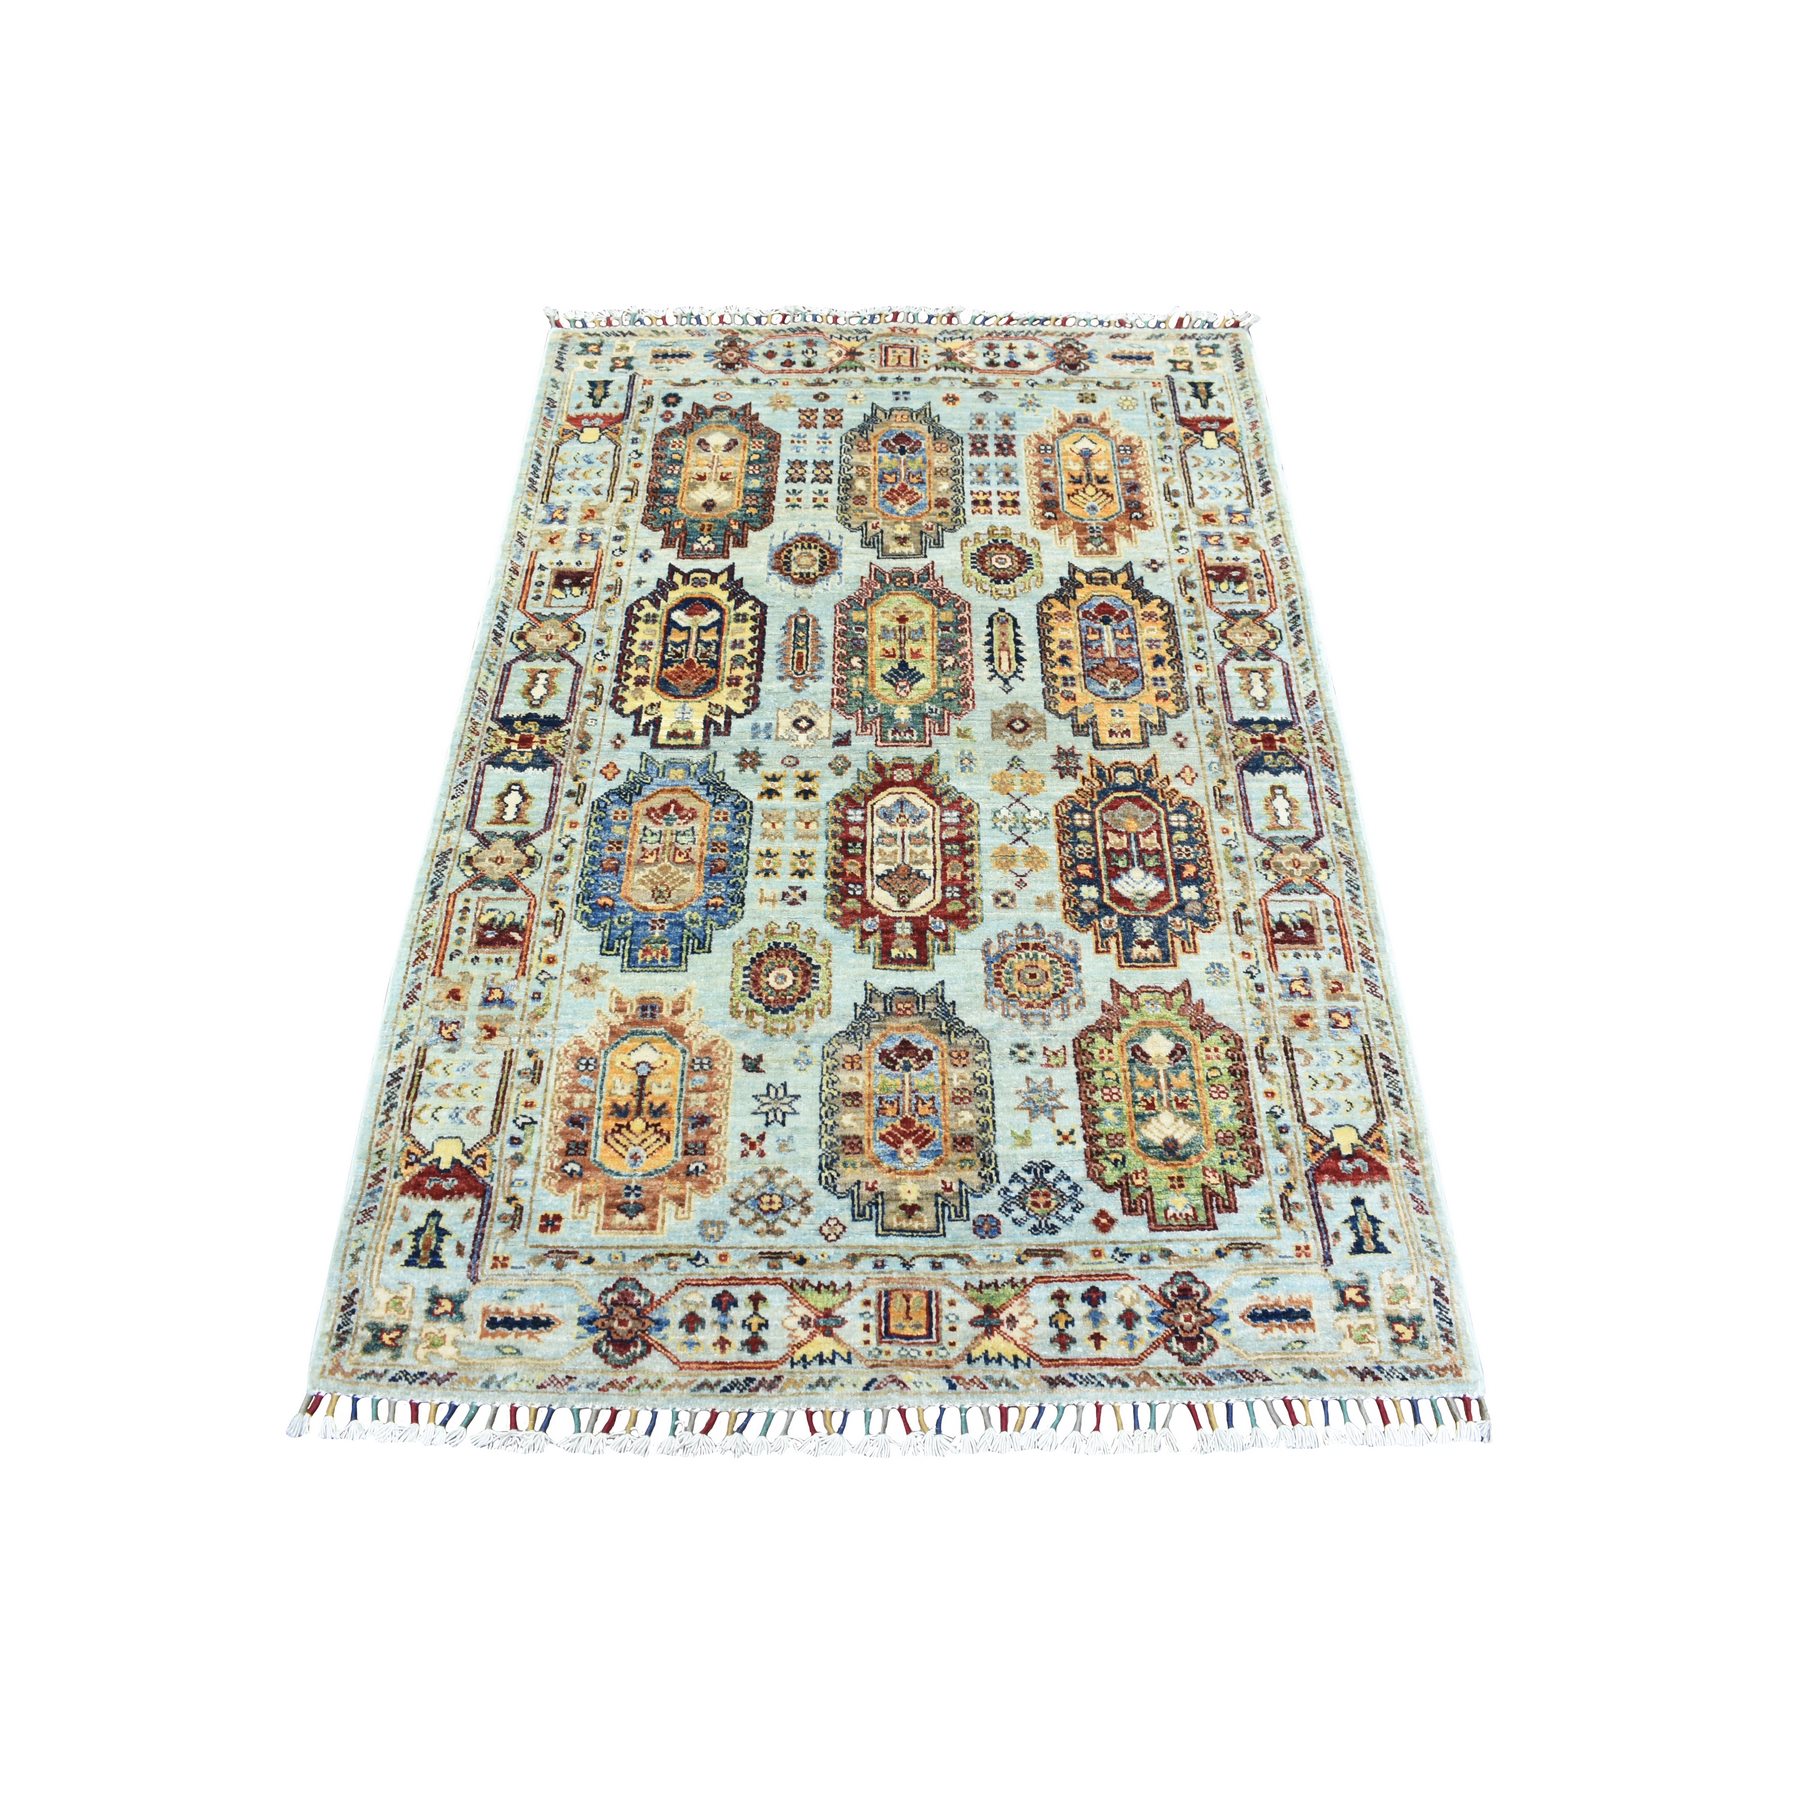 3'4"x5' Light Blue, Densely Woven Soft Wool Hand Woven, Afghan Super Kazak with Repetitive Caucasian Gul Design Natural Dyes, Oriental Rug 